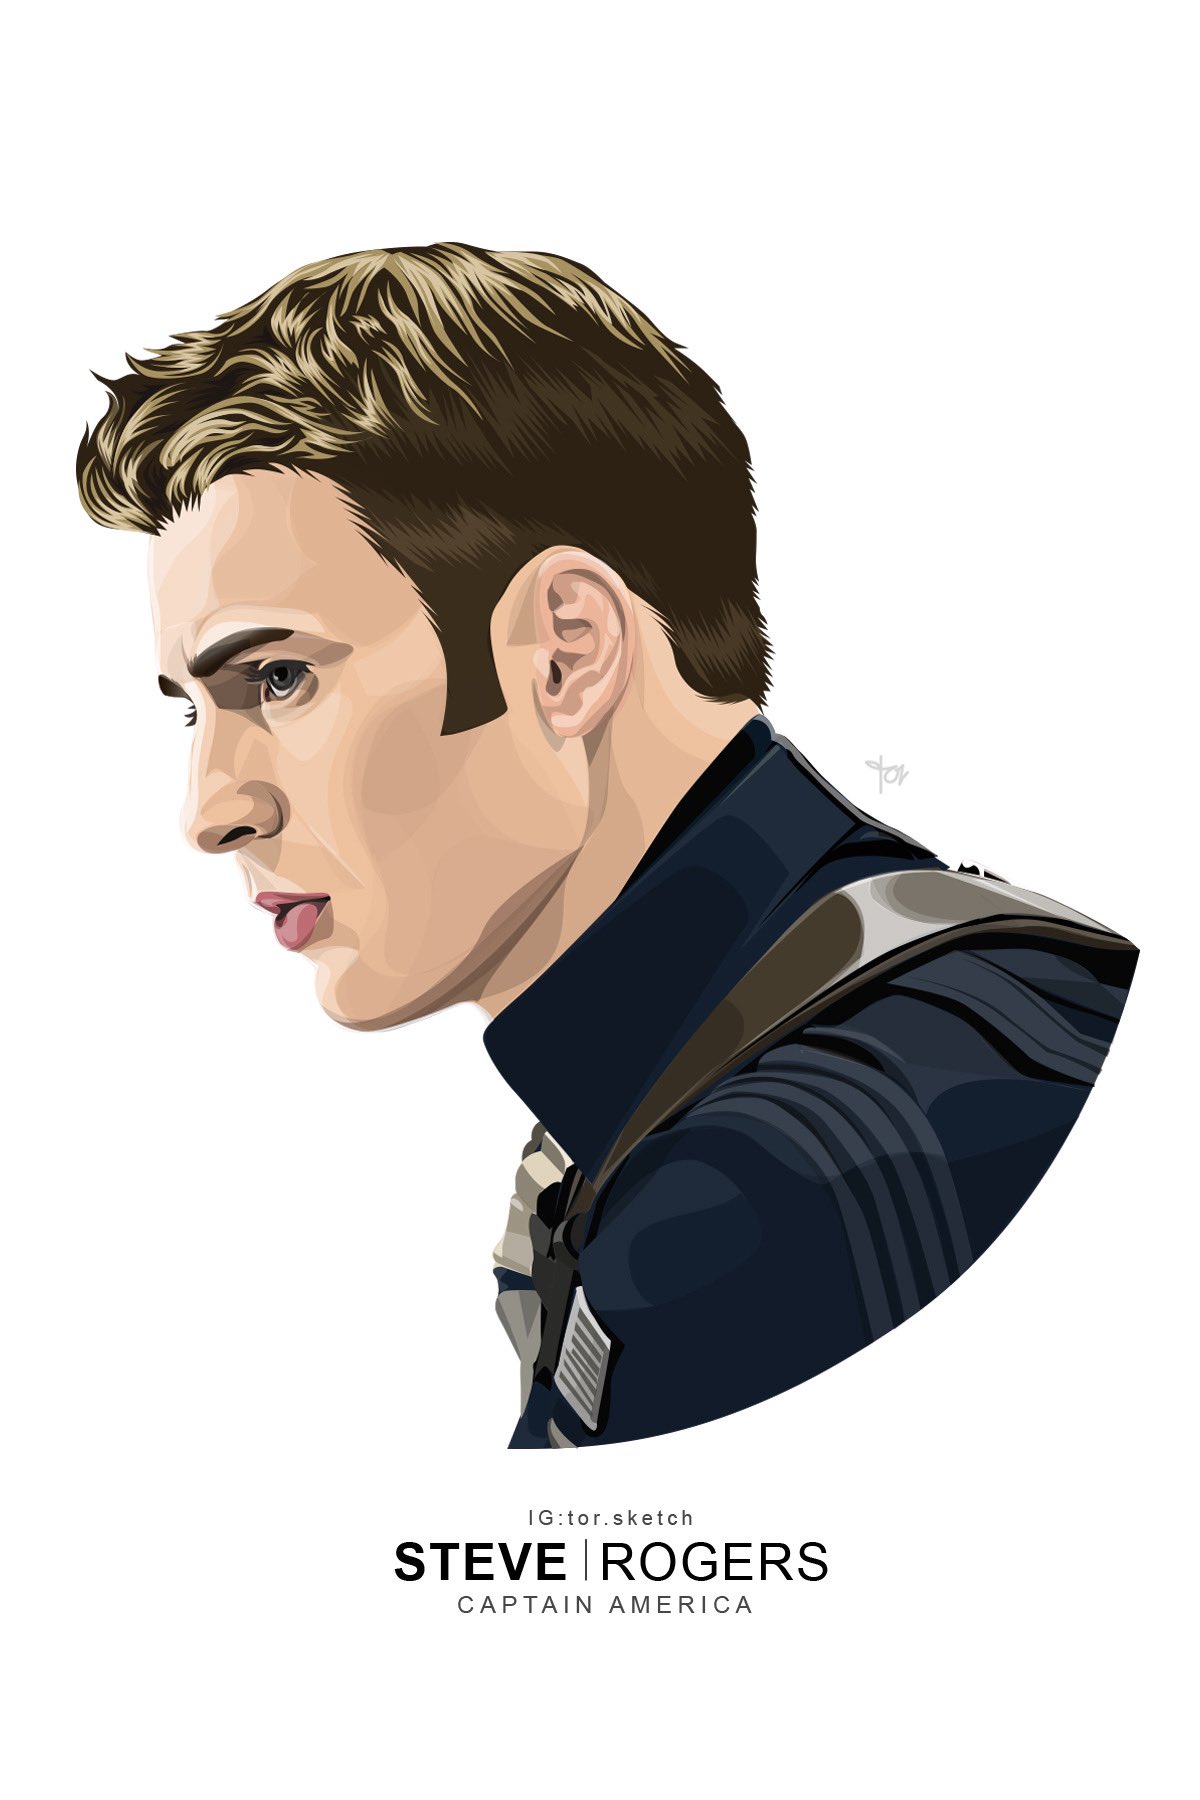 Since it's the Fourth of July, I thought I should illustrate a quick sketch  of Steve Rogers. Illustrated in 1 hour. @chrisevans… | Instagram